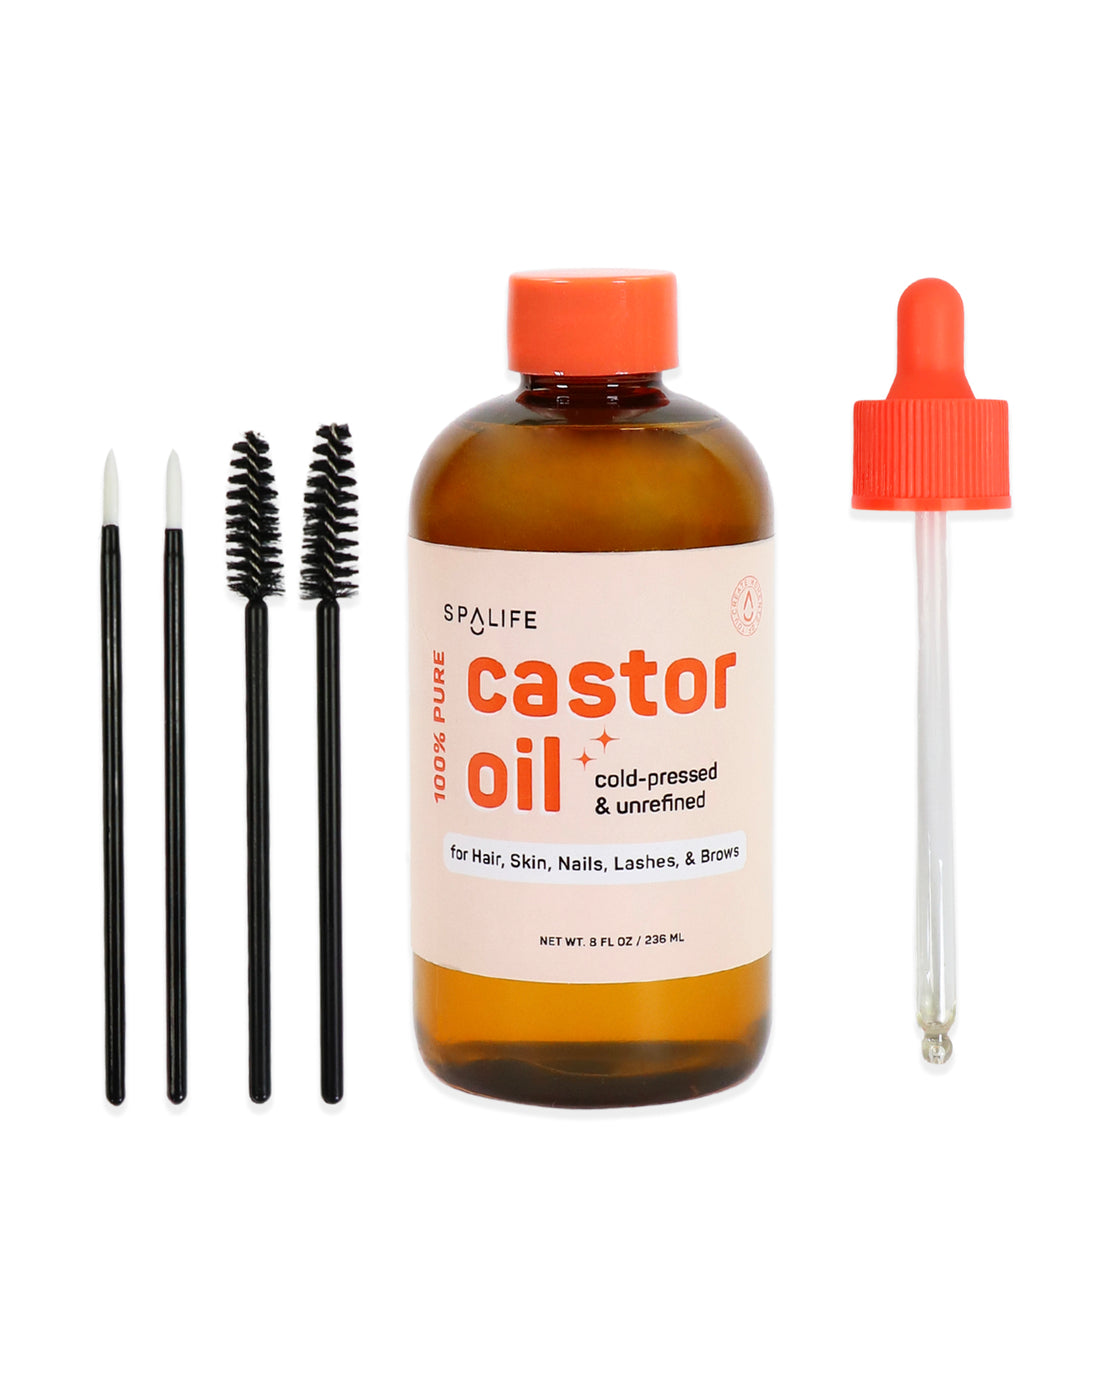 Pure_castor_oil_bottle_with_dr-882